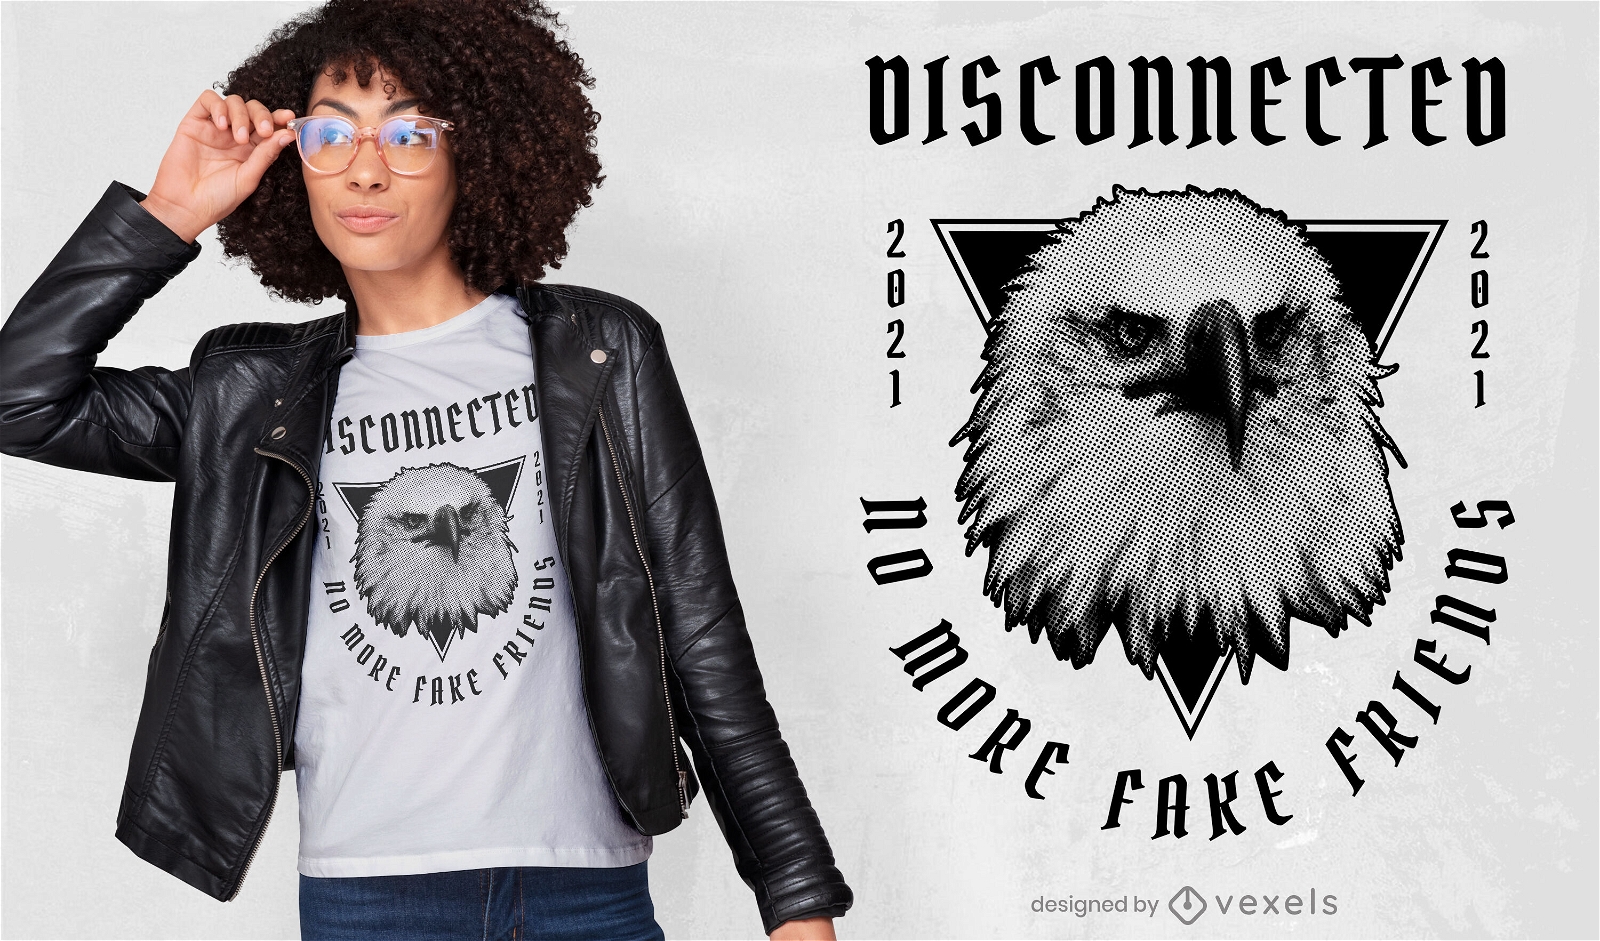 Angry eagle head photographic t-shirt psd